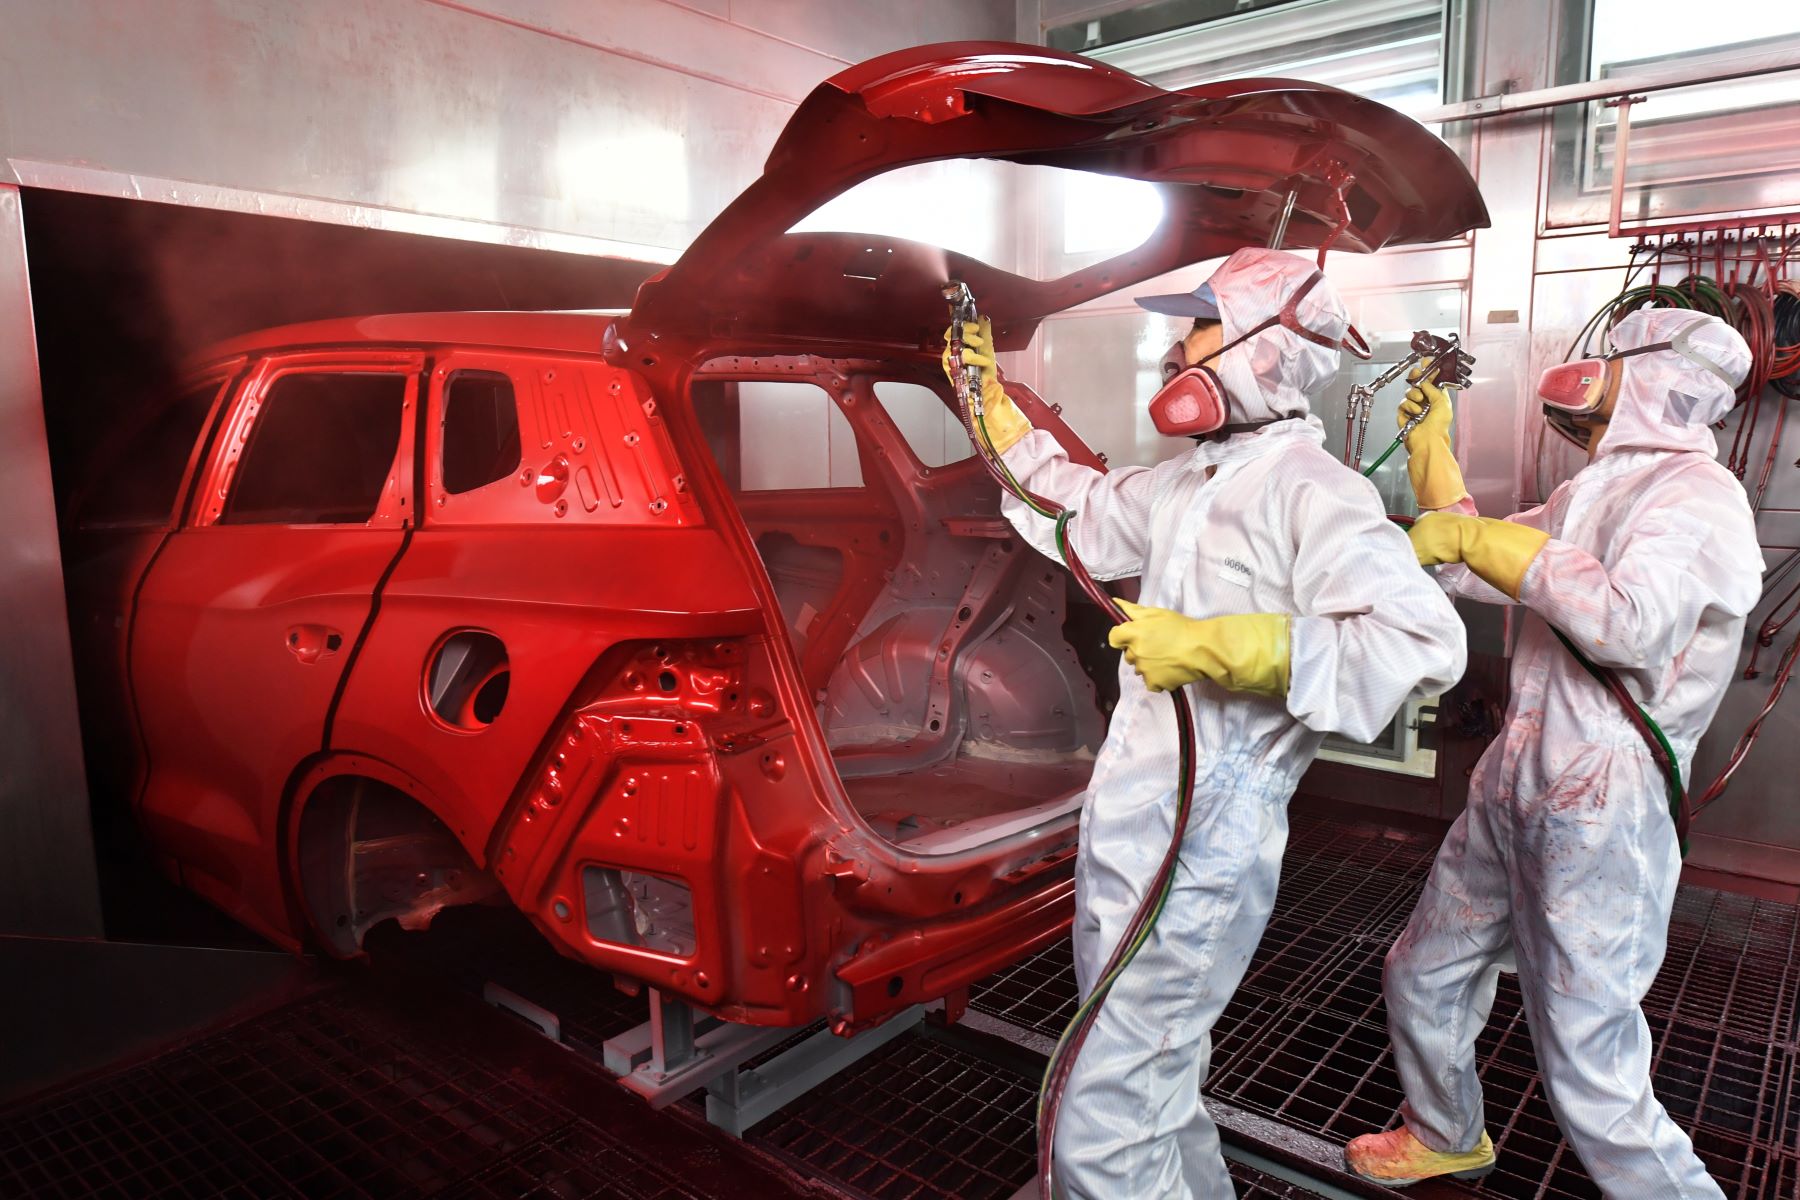 Workers at a BYD Automobile Company Limited factory plant in Xi'an, China, paint spraying a car frame body shell red